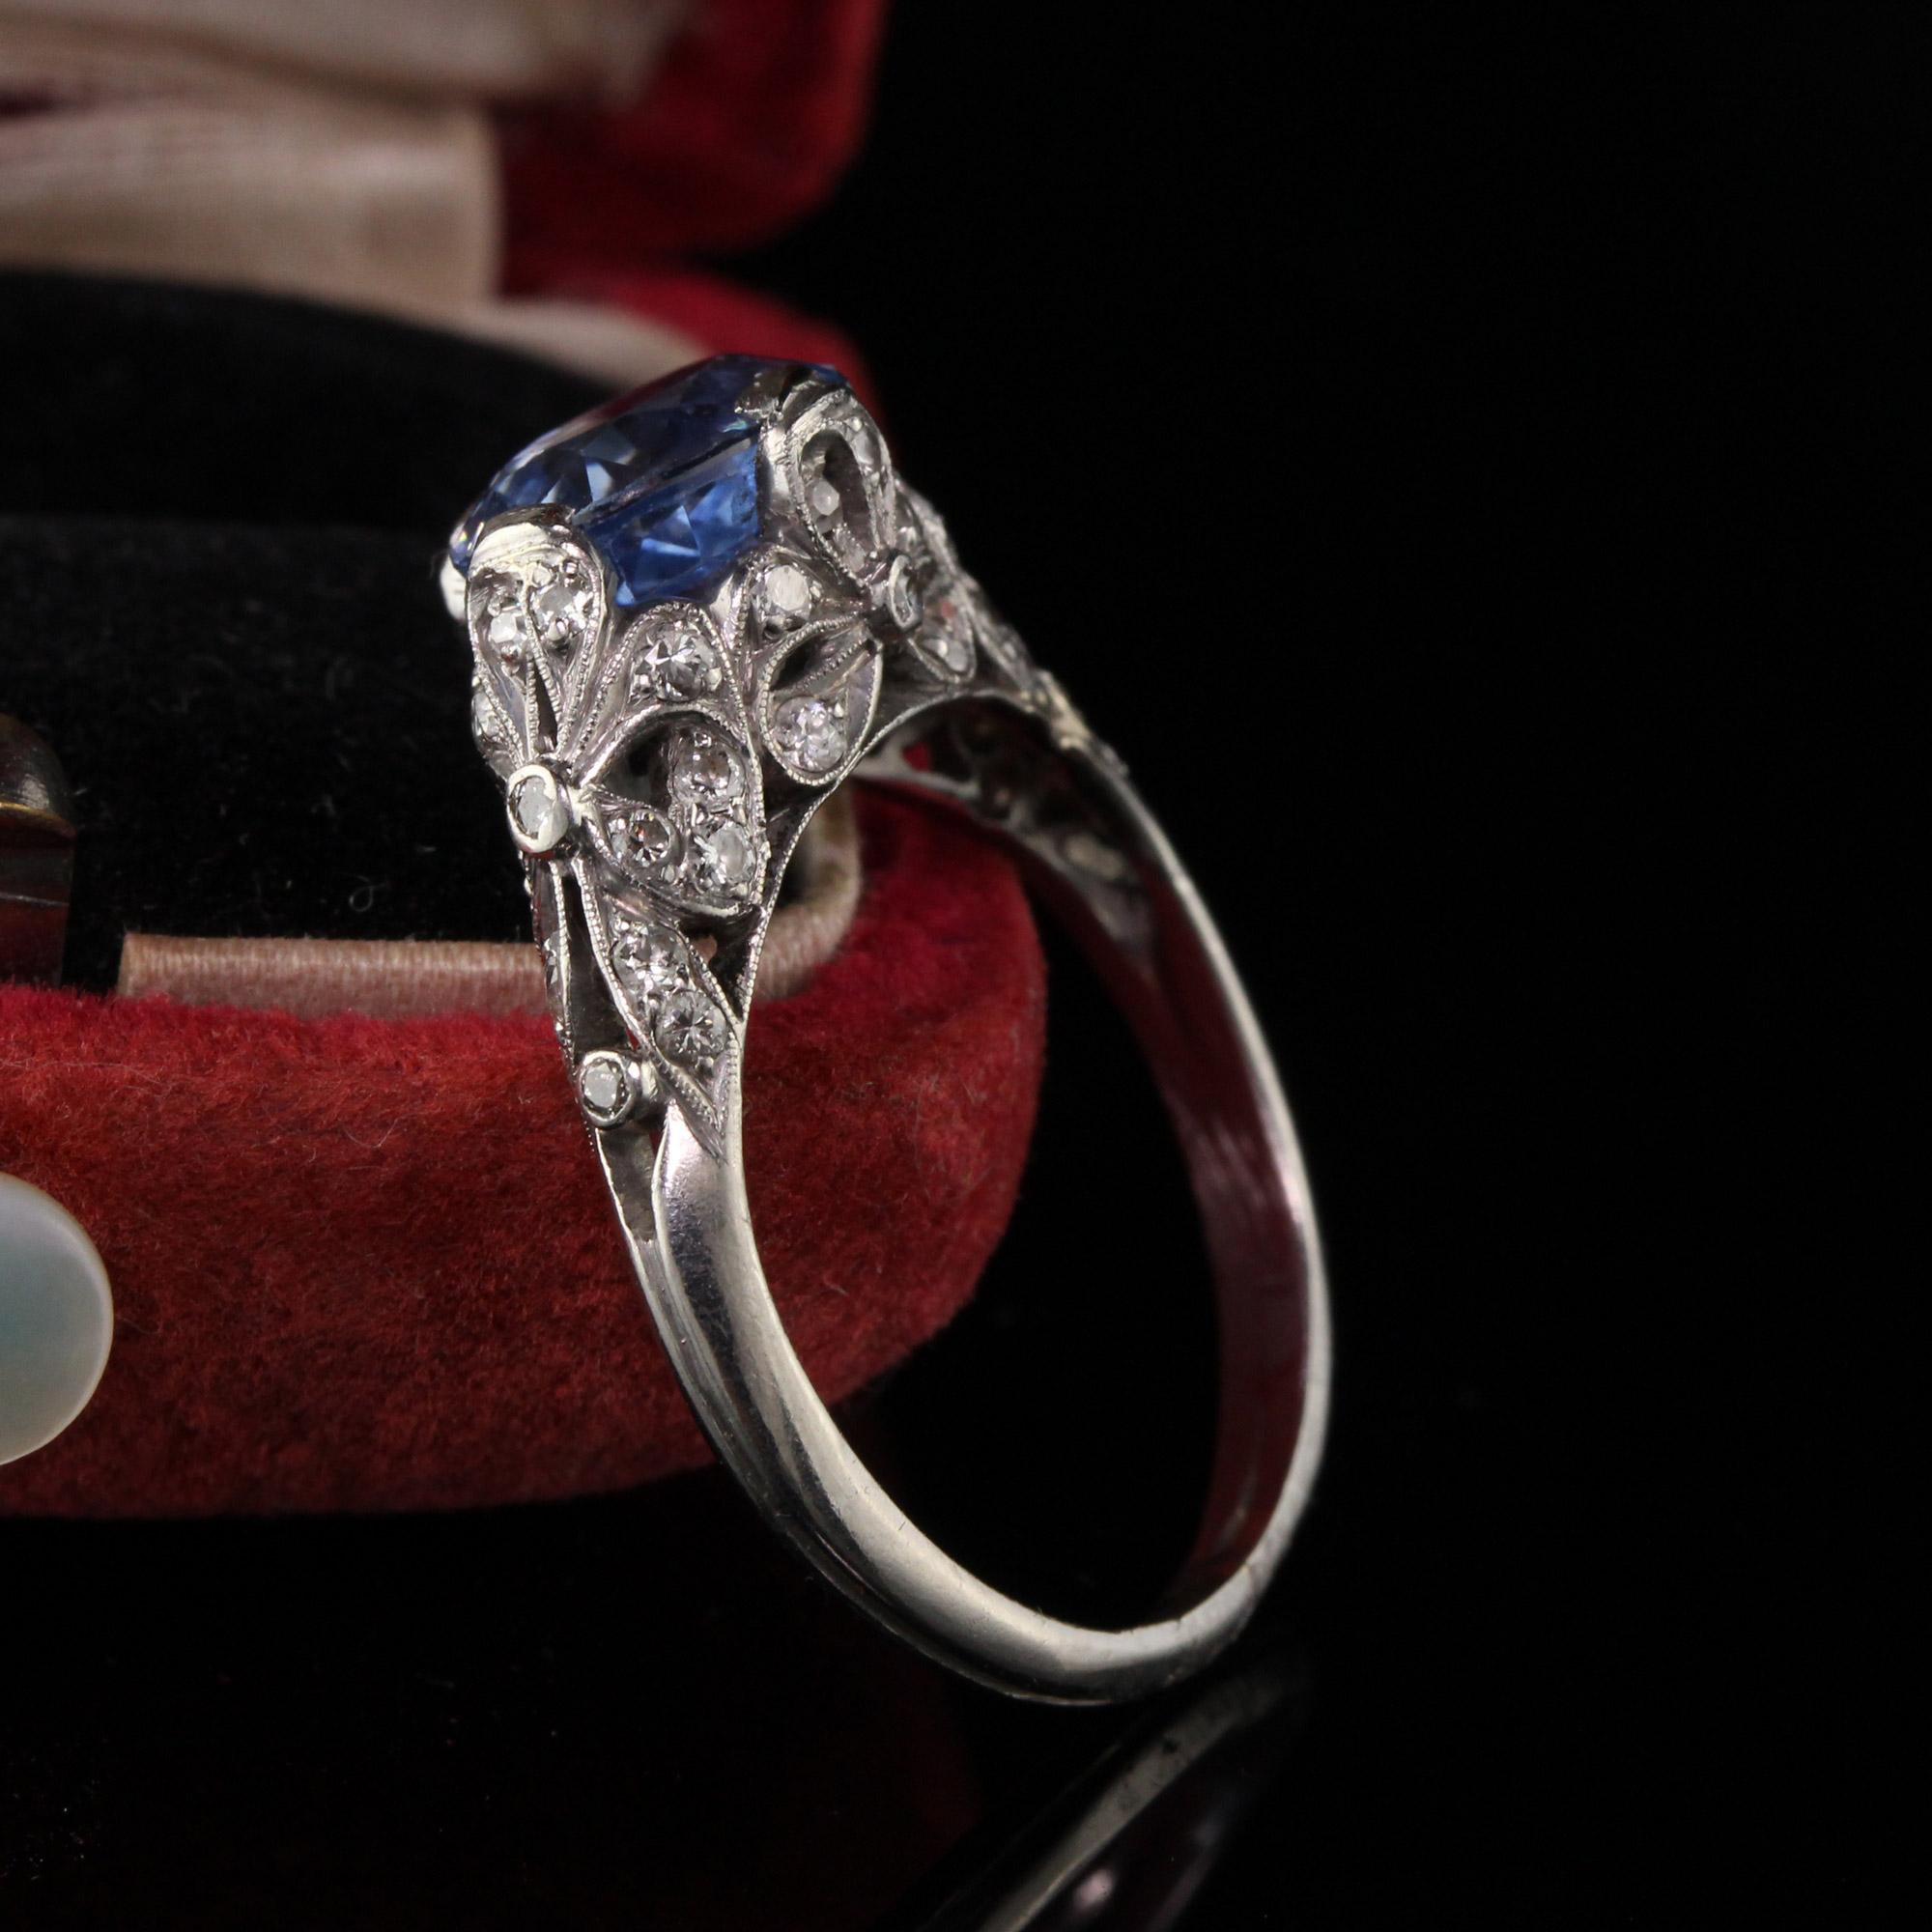 Stunning antique engagement ring with diamonds and a gorgeous sapphire center. 

Item #R0534

Metal: Platinum

Weight: 5.9 Grams

Total Diamond Weight: Approximately 1.00 cts

Diamond Color: H

Diamond Clarity: VS2

Center Sapphire Weight: 3.24